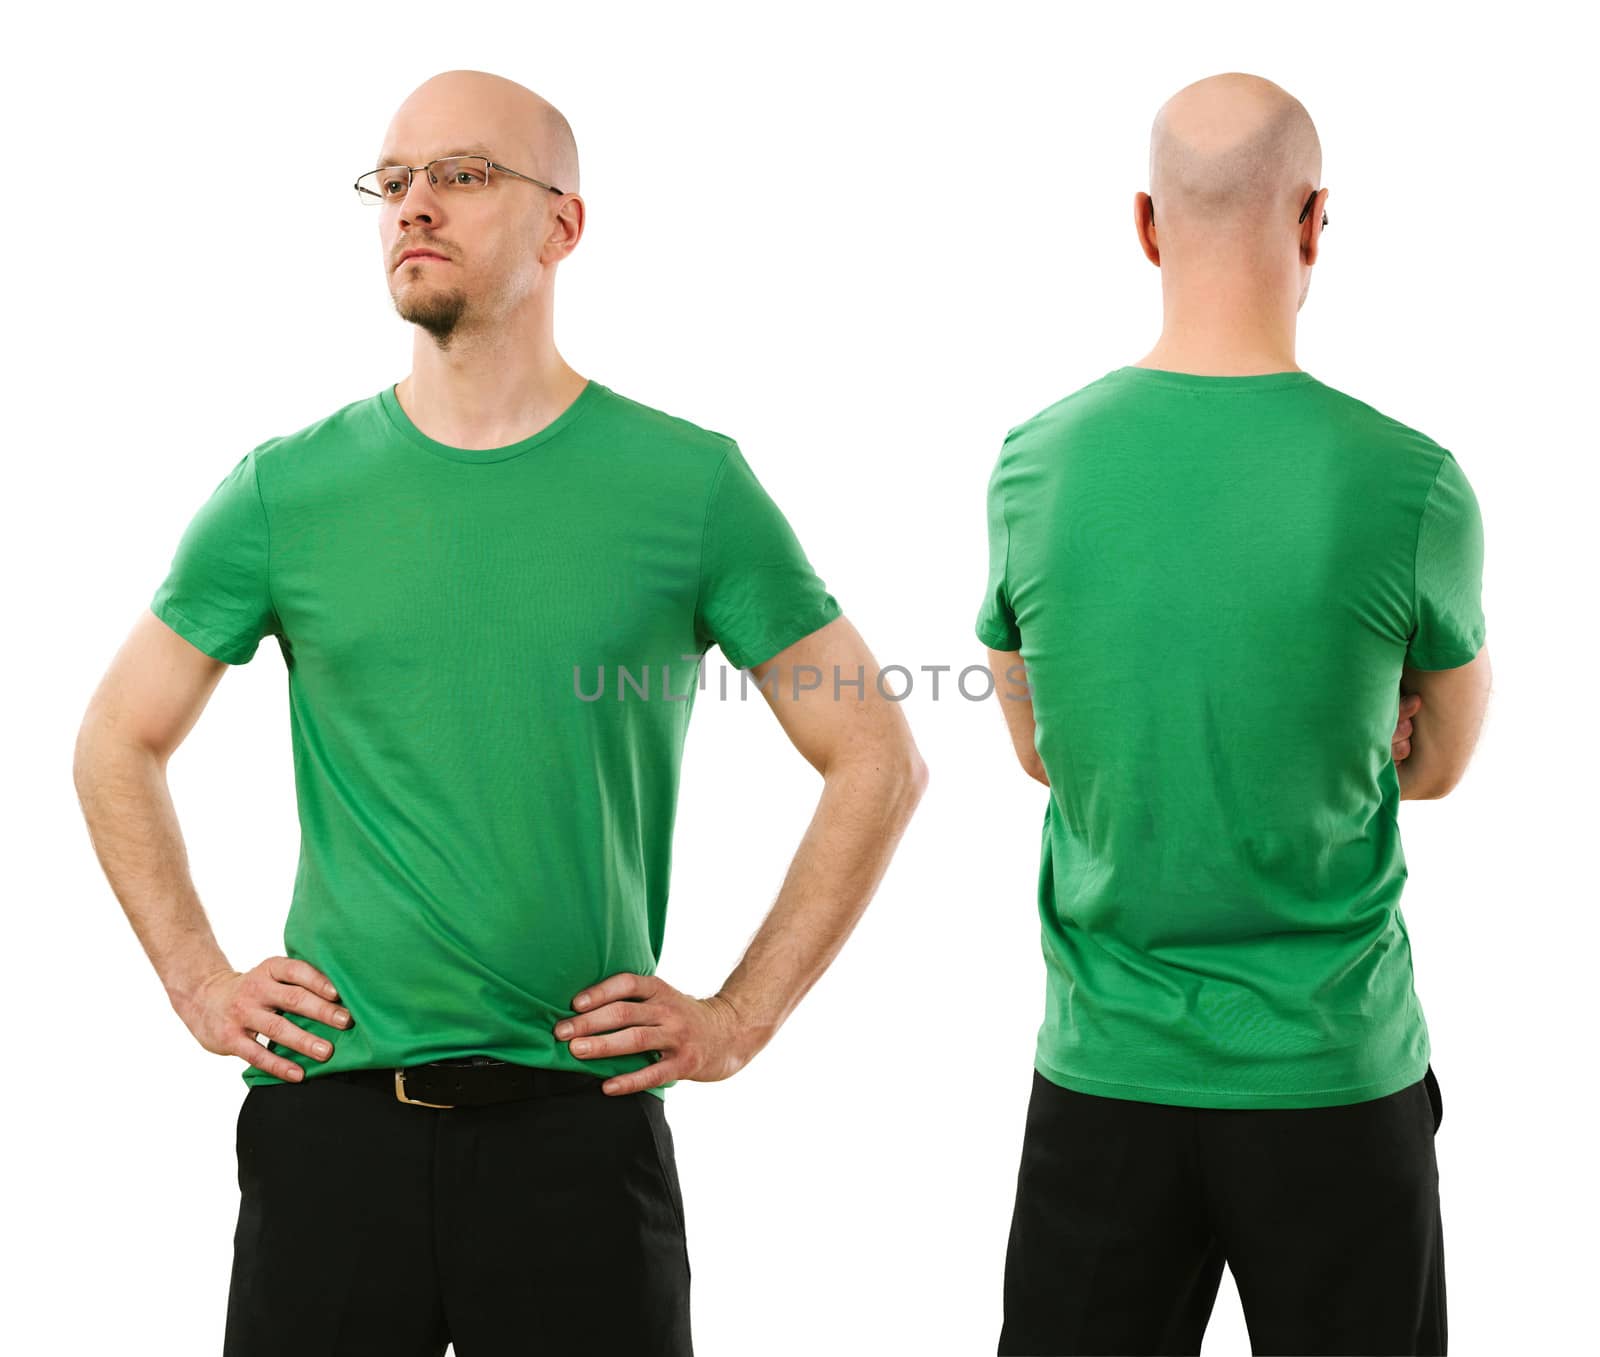 Photo of a man wearing blank green t-shirt, front and back. Ready for your design or artwork.